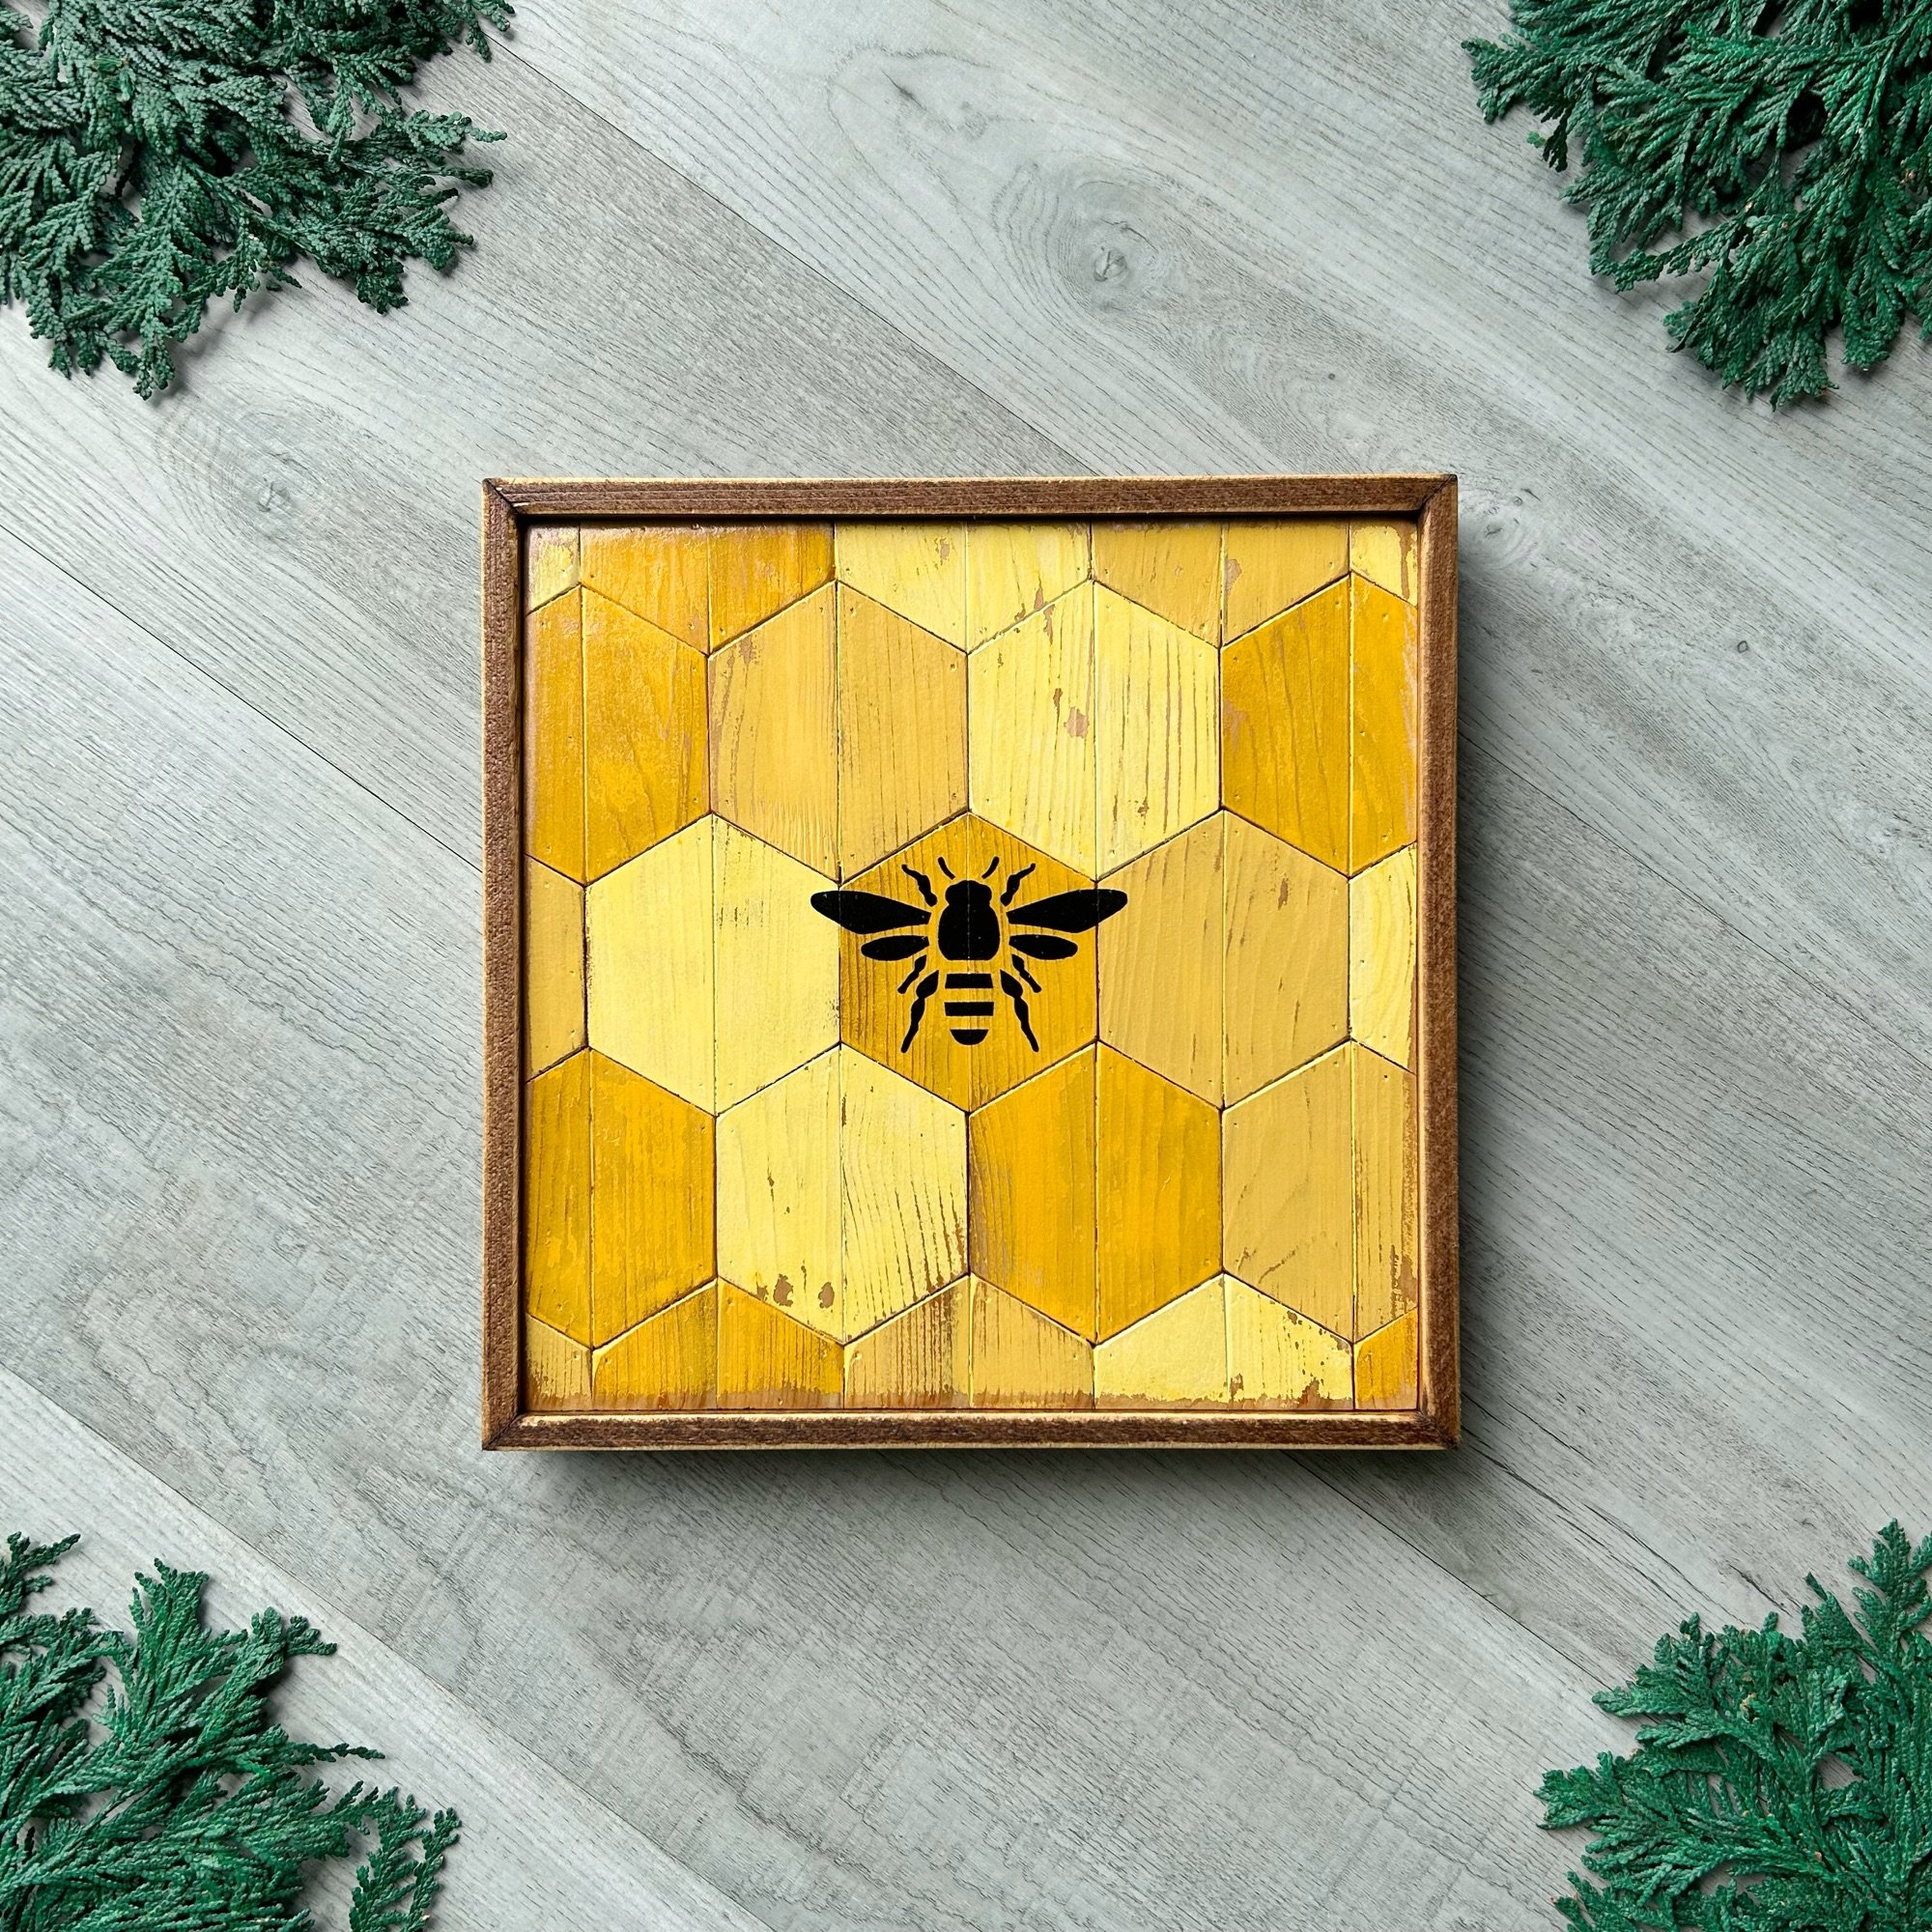 Honey Bee Decor for Kitchen. Barn Quilts. Wood Sign with Honeycomb